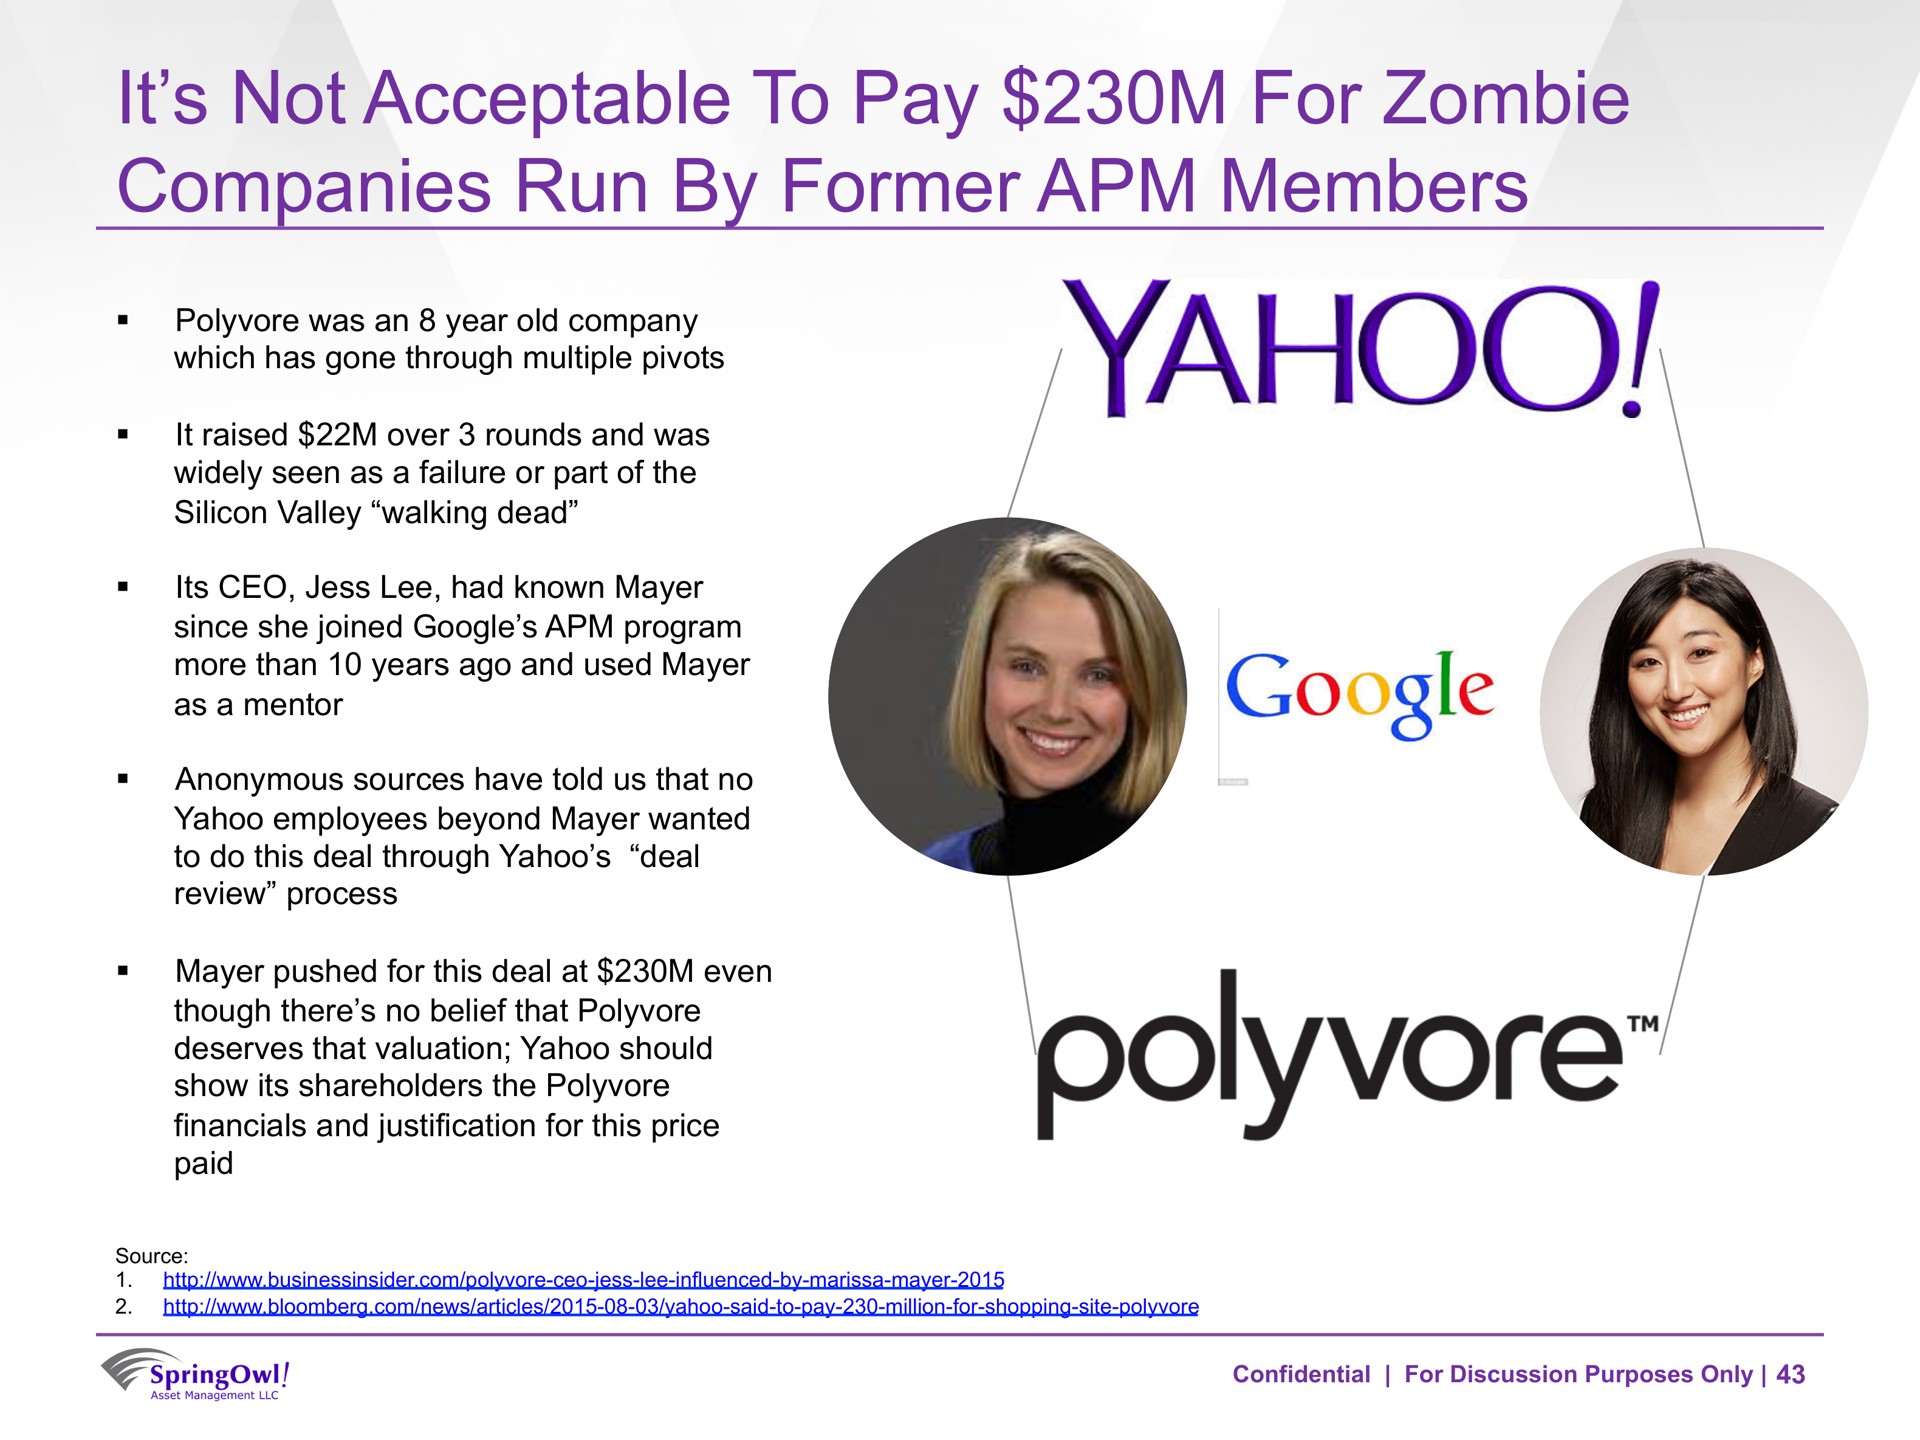 it not acceptable to pay for zombie companies run by former members | SpringOwl